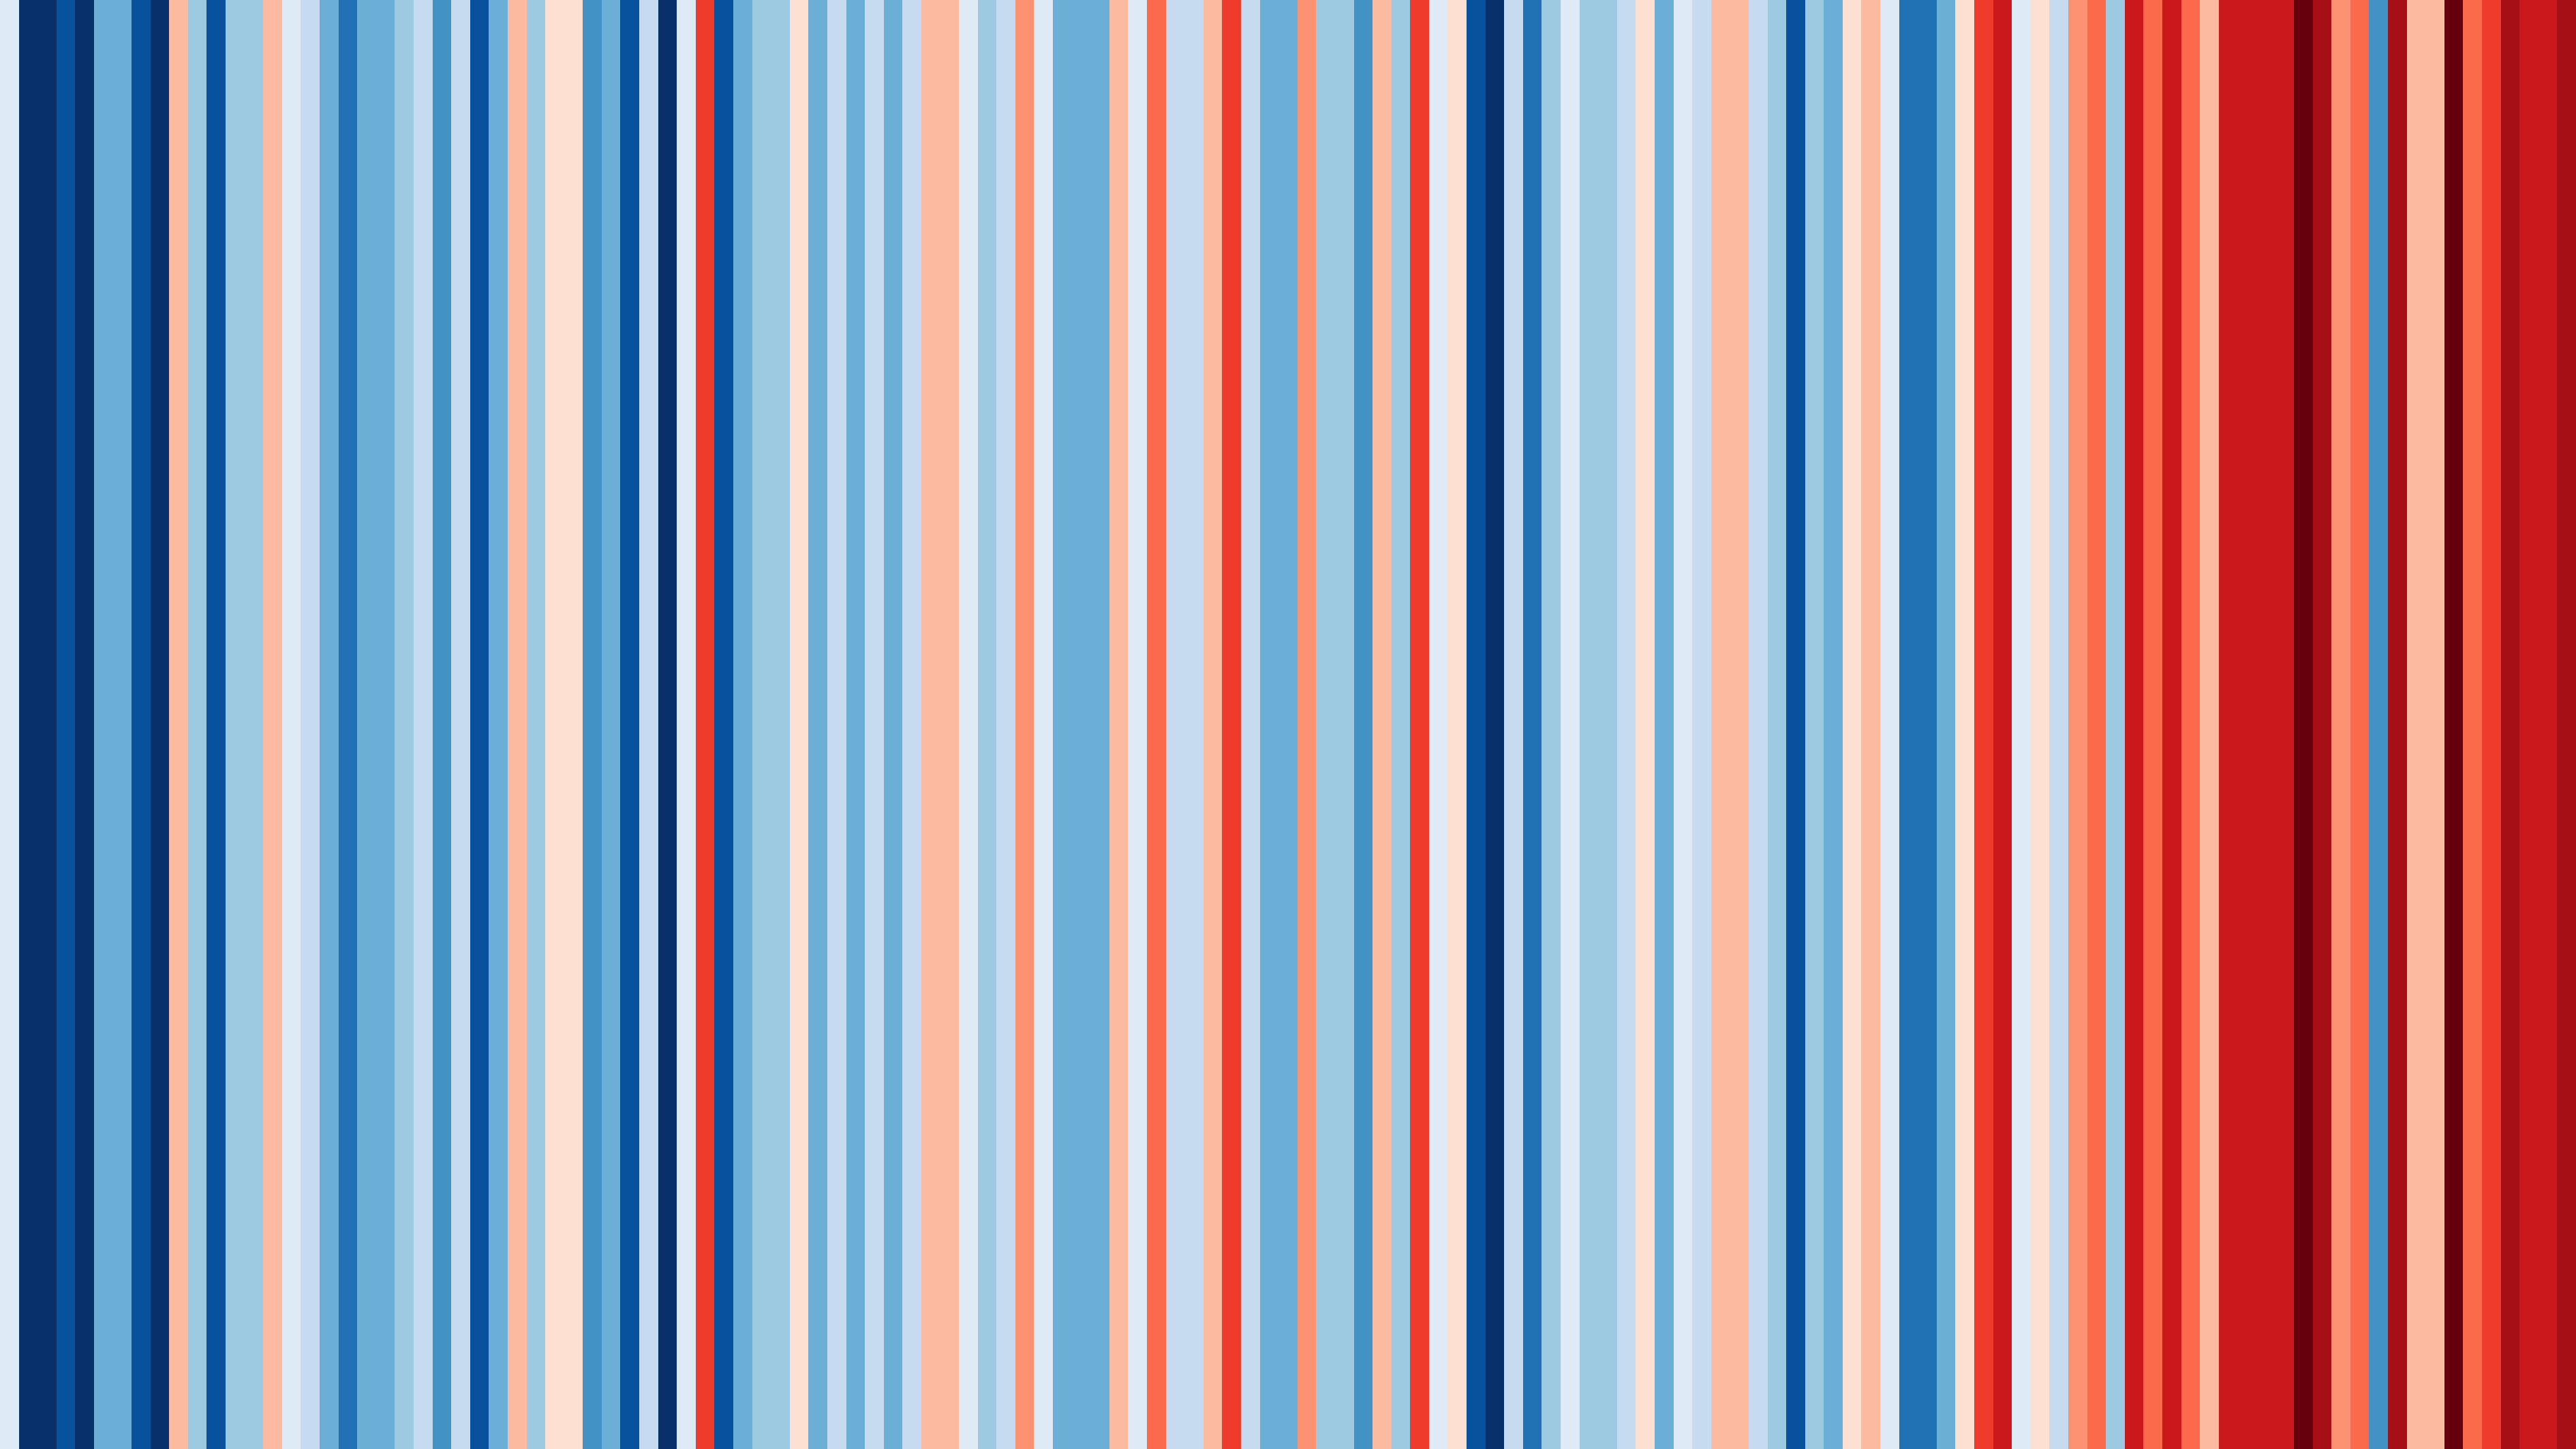 <p>Warming Stripes for United Kingdom from 1884-2020</p>